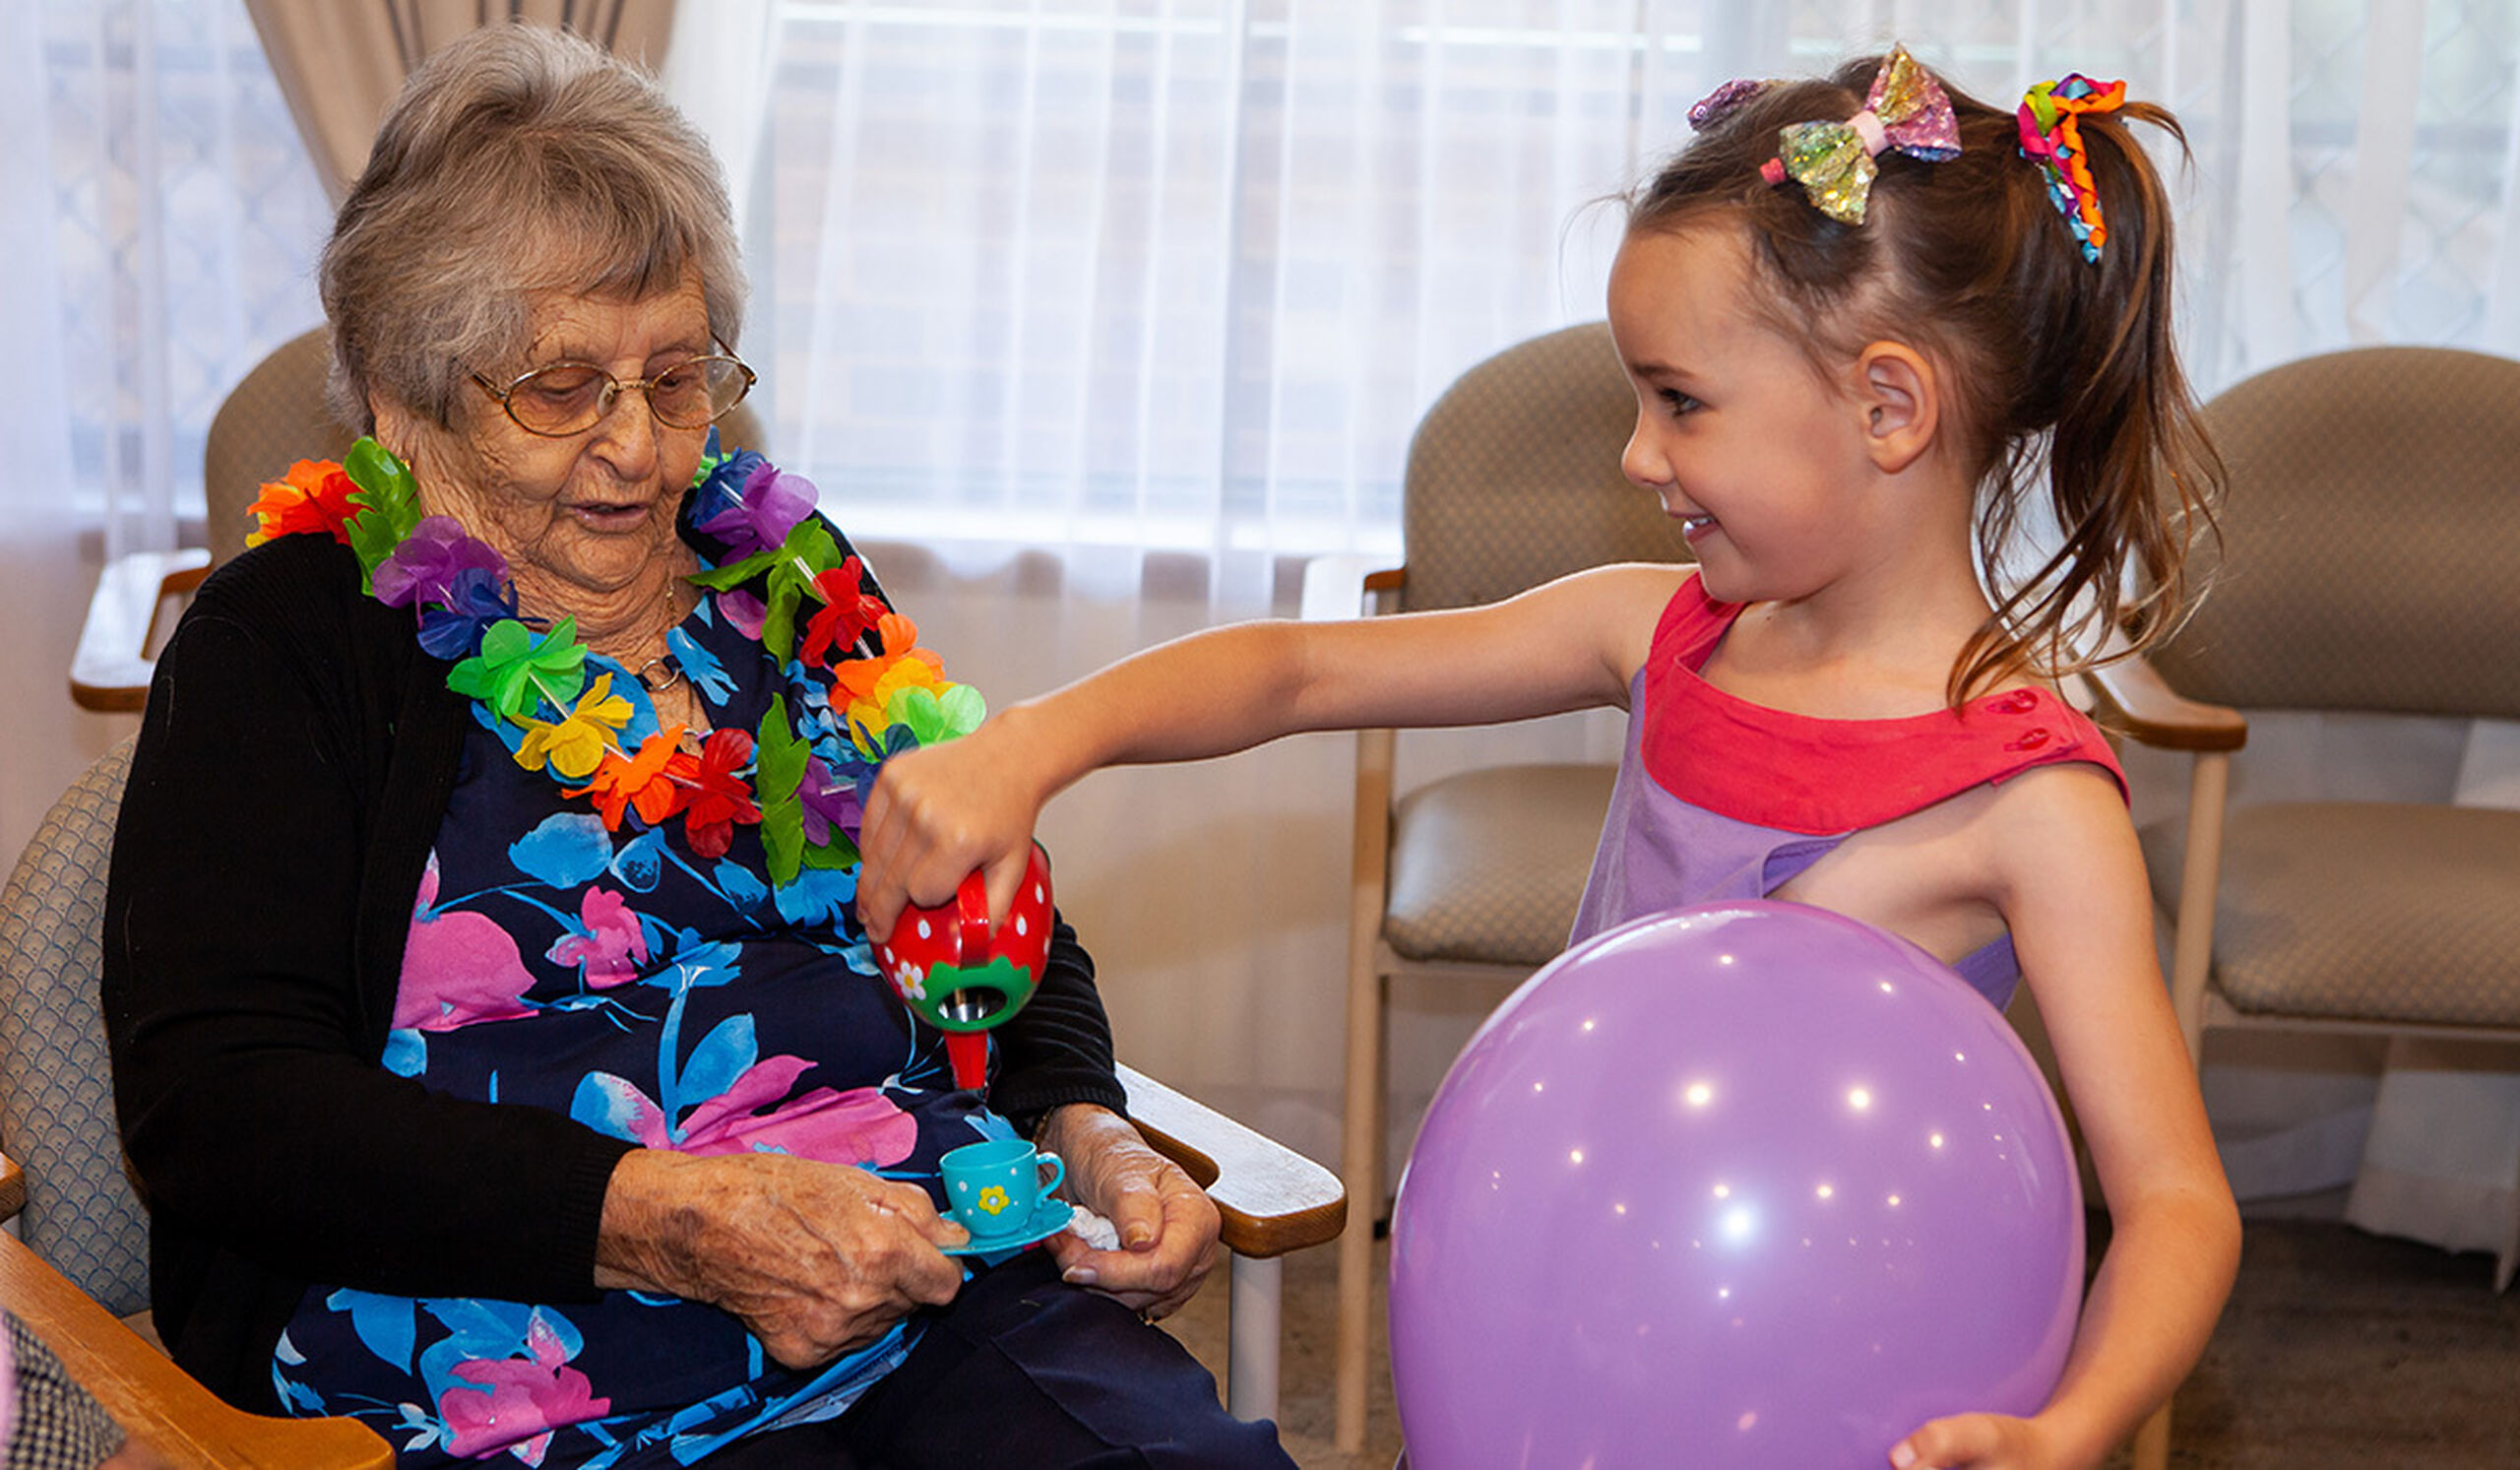 Intergenerational playgroup fosters new friendships at William Carey Court Residential Care